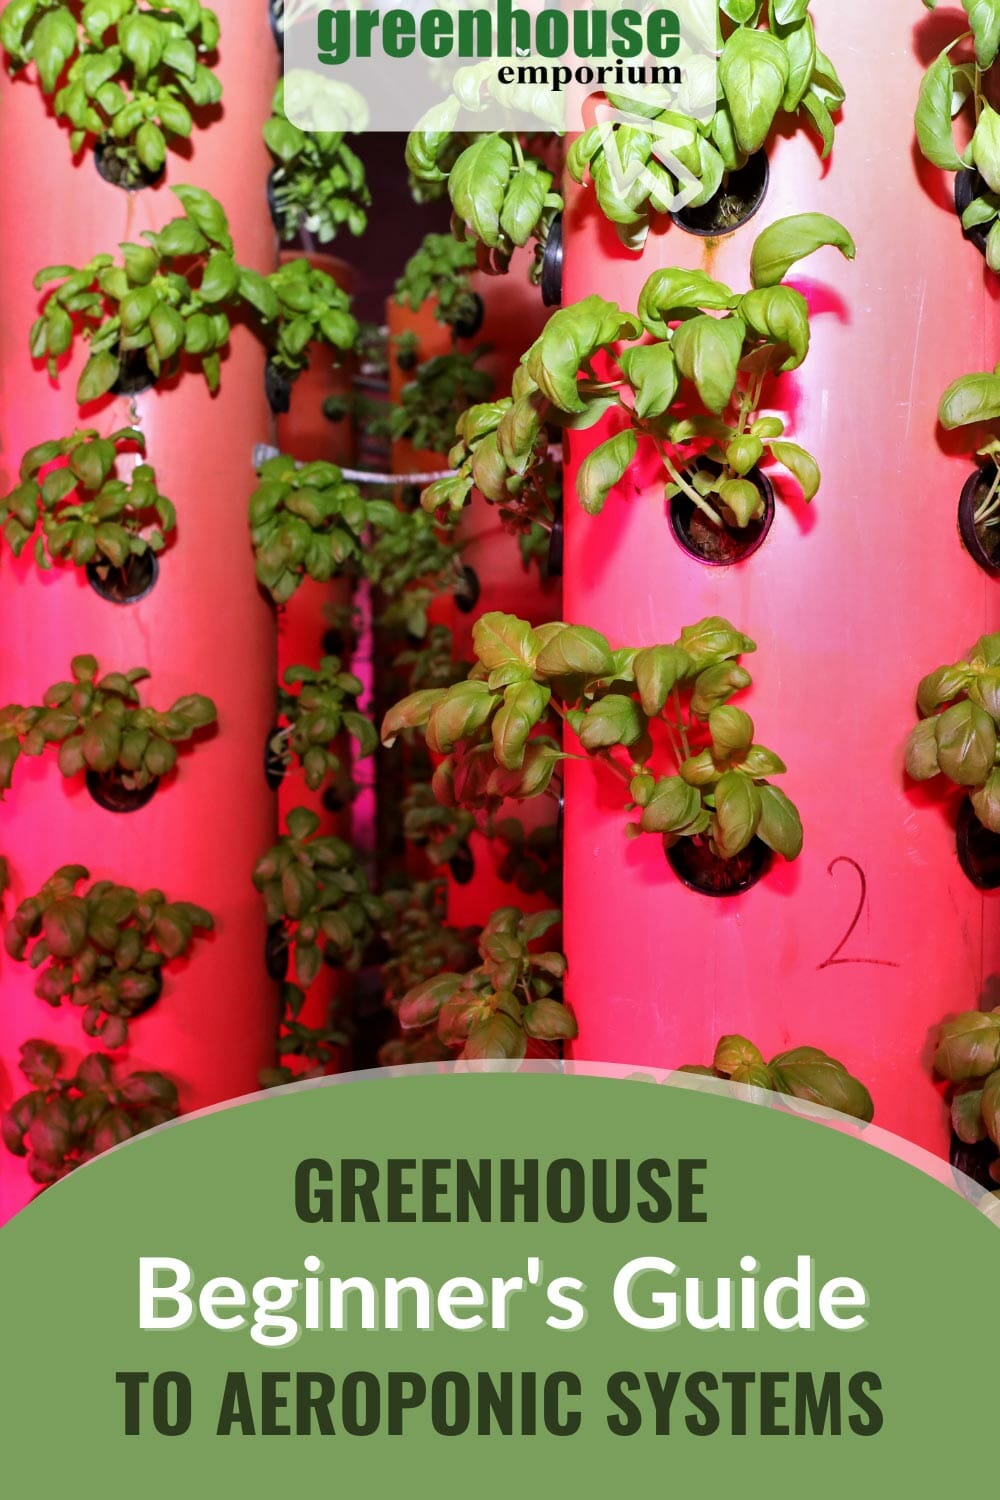 Aeroponic towers with plants growing out of them on the side with the text: Greenhouse Beginner's Guide to Aeroponic Systems